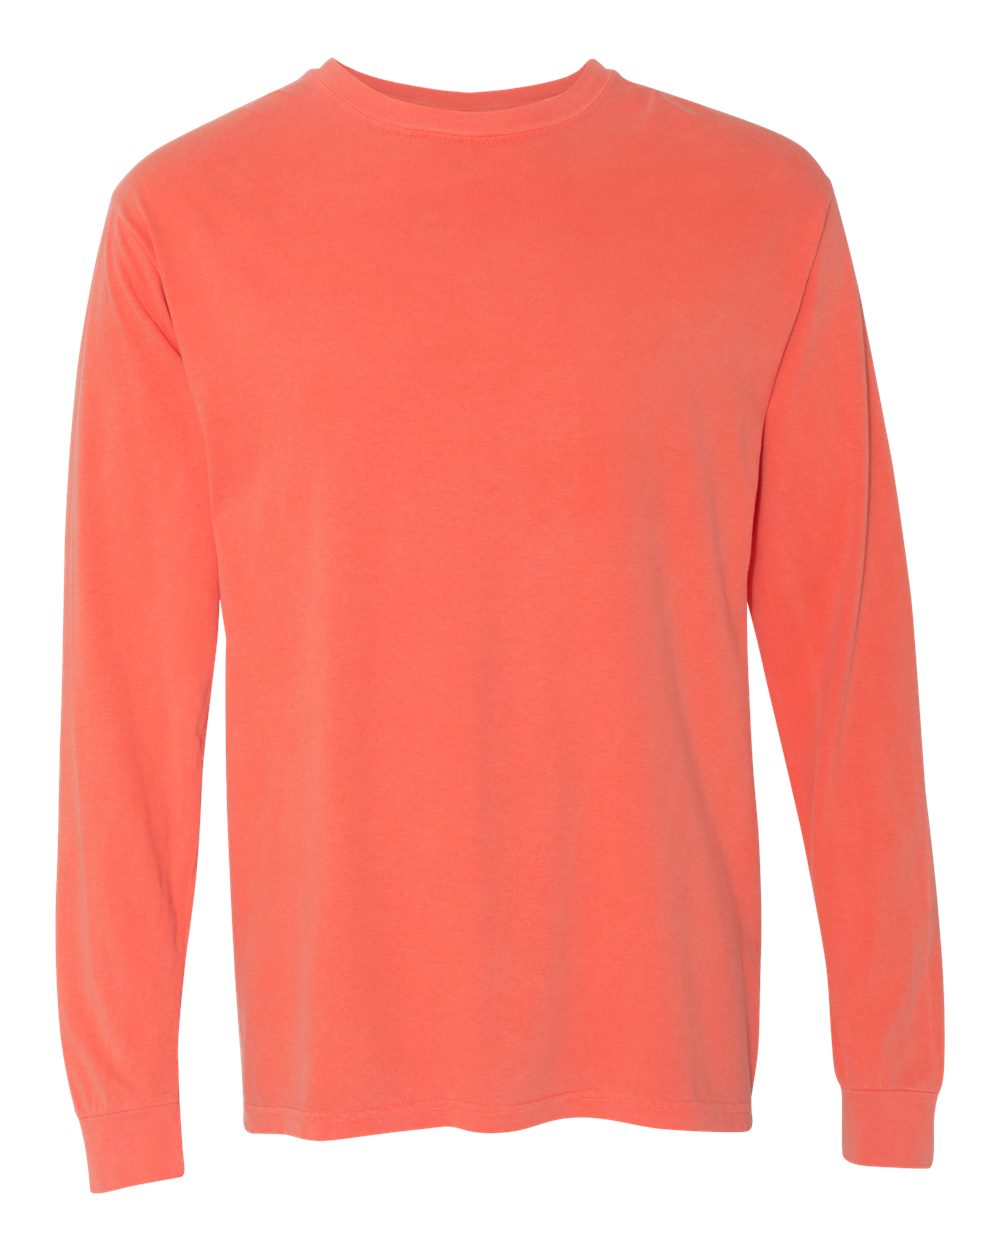 Comfort Colors Long Sleeve (6014) in Bright Salmon